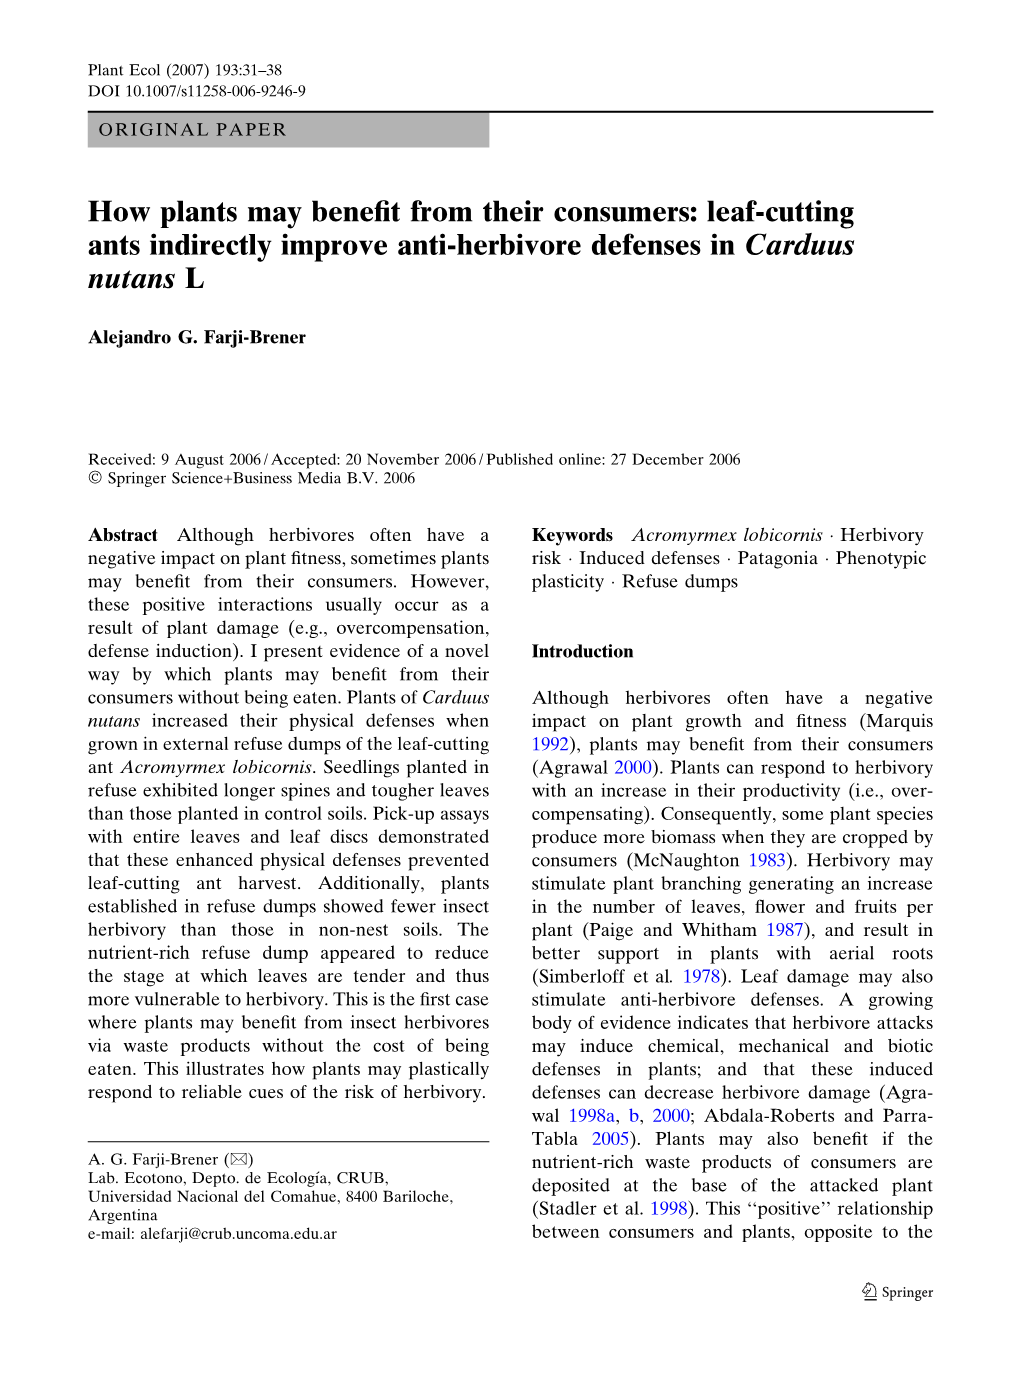 How Plants May Benefit from Their Consumers: Leaf-Cutting Ants Indirectly Improve Anti-Herbivore Defenses in Carduus Nutans L